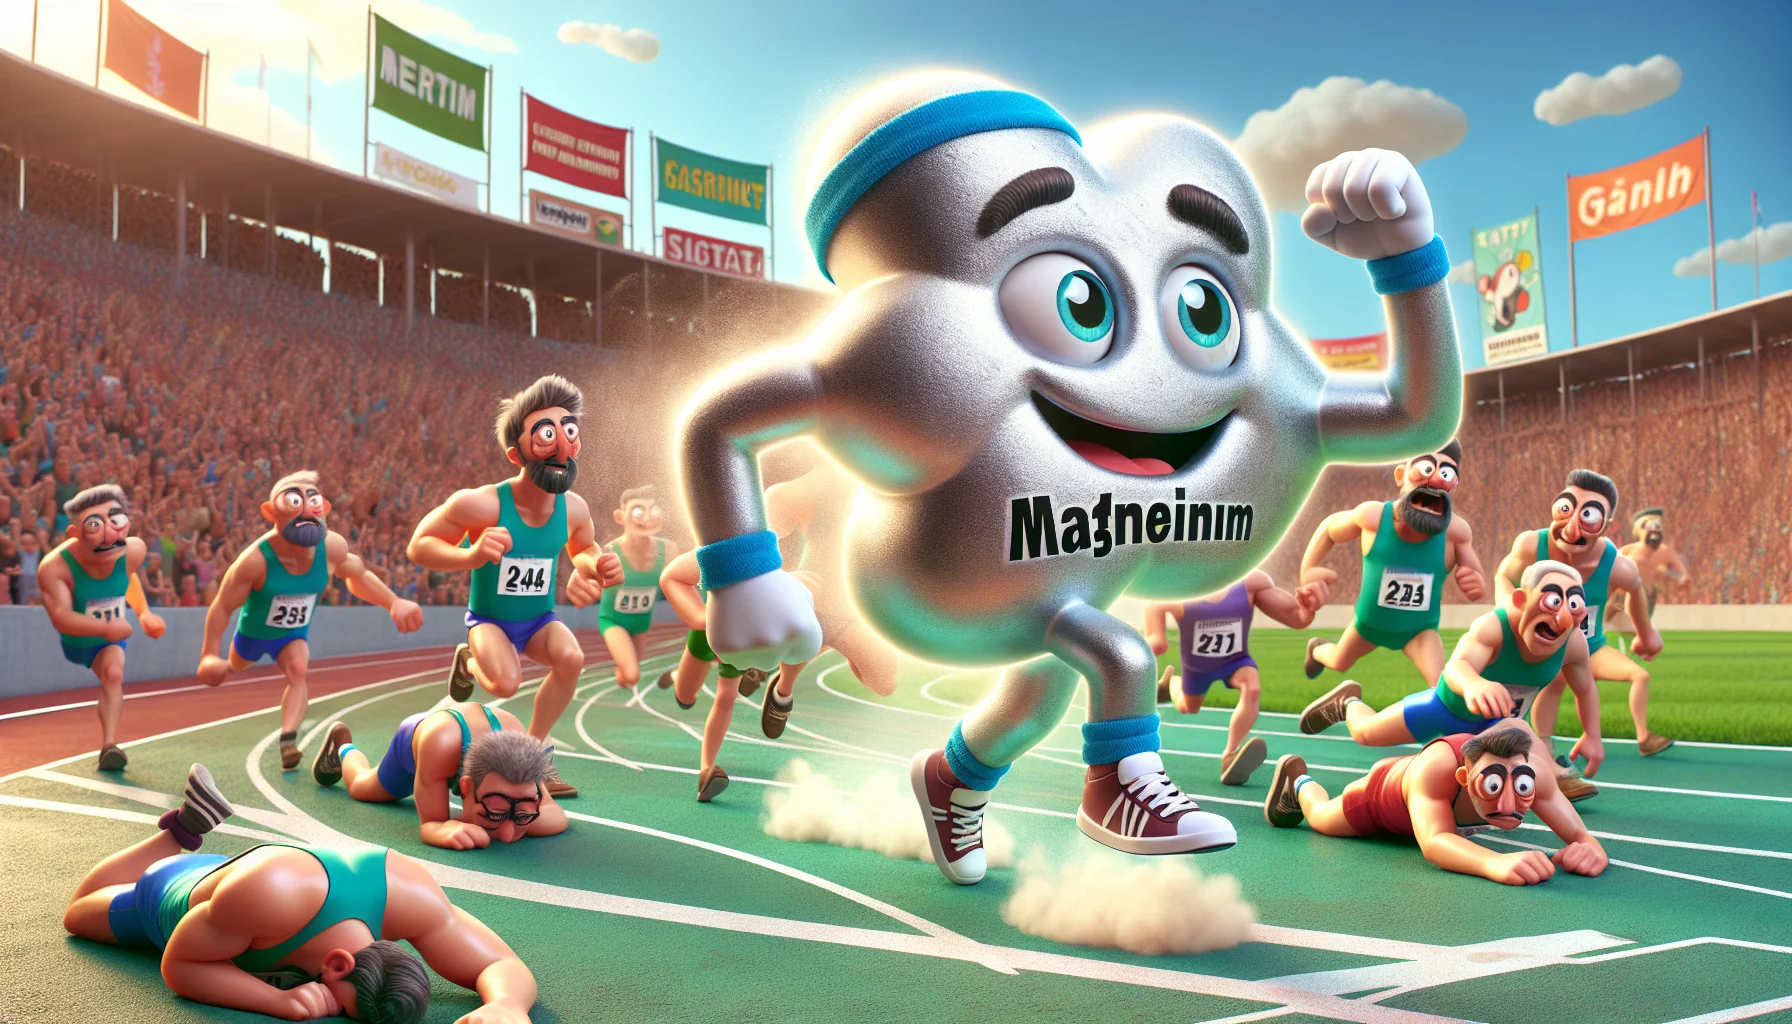 Create a detailed and colorful image embodying humor and utilizing a playful representation of the compound magnesium nitrite. This entity is personified with cartoonish eyes, a friendly smile, and wearing athletic gear such as a sweatband and sneakers. It is animatedly striking a dynamic pose as if running in a marathon, with a cloud of dust behind it to signify speed. Around it, is a variety of worn-out competitor caricatures, struggling to keep up, while spectators cheer on from sidelines. The scene takes place at a bright sunlit park, with banners and promotional posters suggesting the benefits of using magnesium nitrite for enhancing athletic performance.